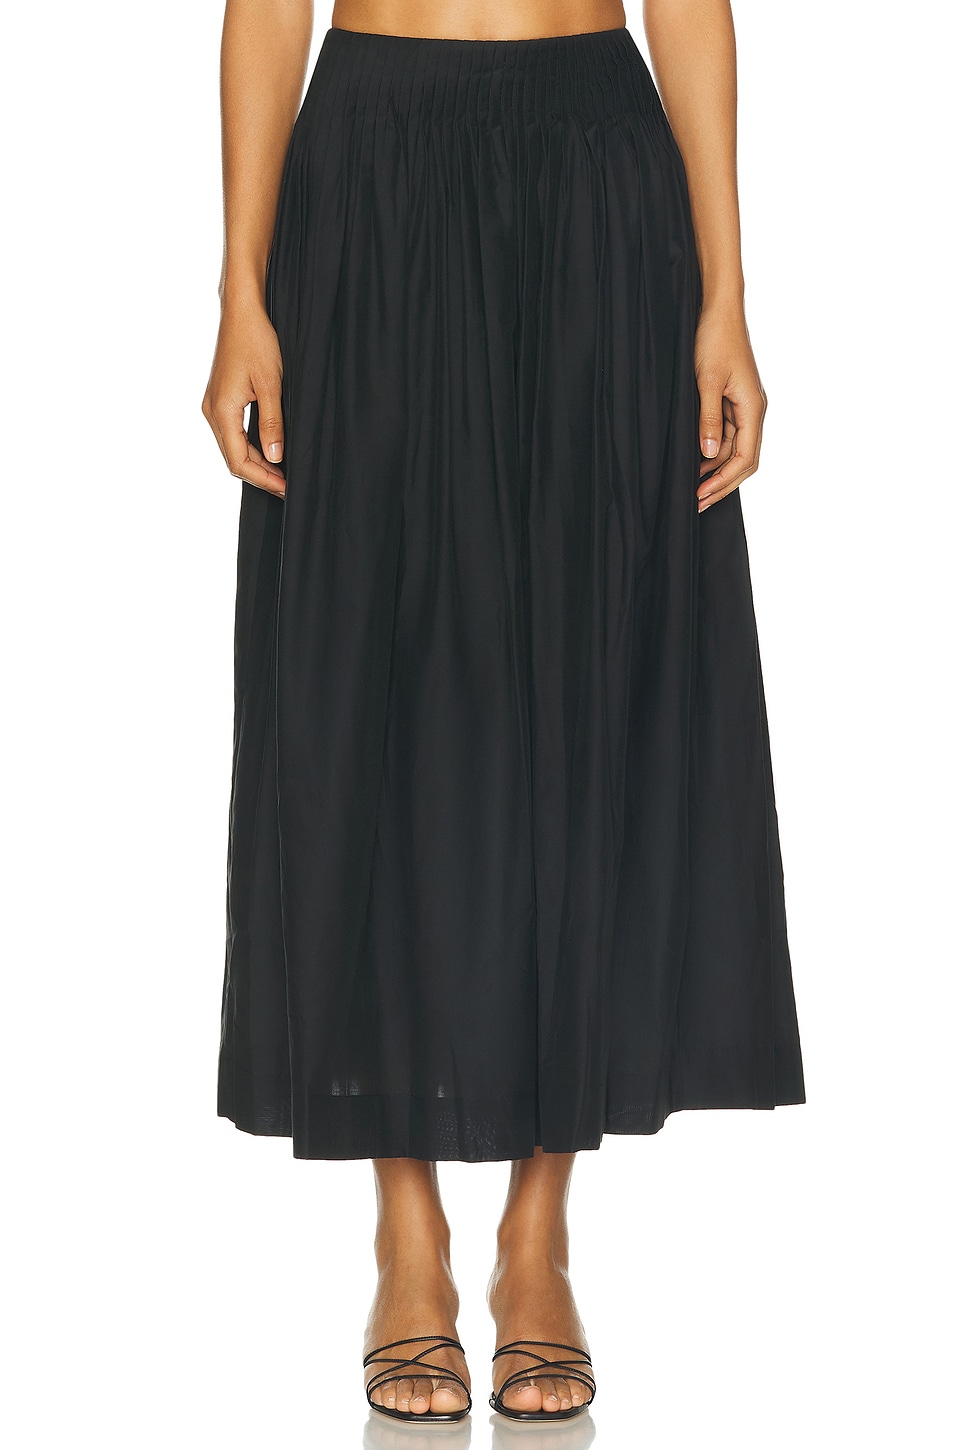 Image 1 of Loulou Studio Artemis Long Skirt With Gathers in Black